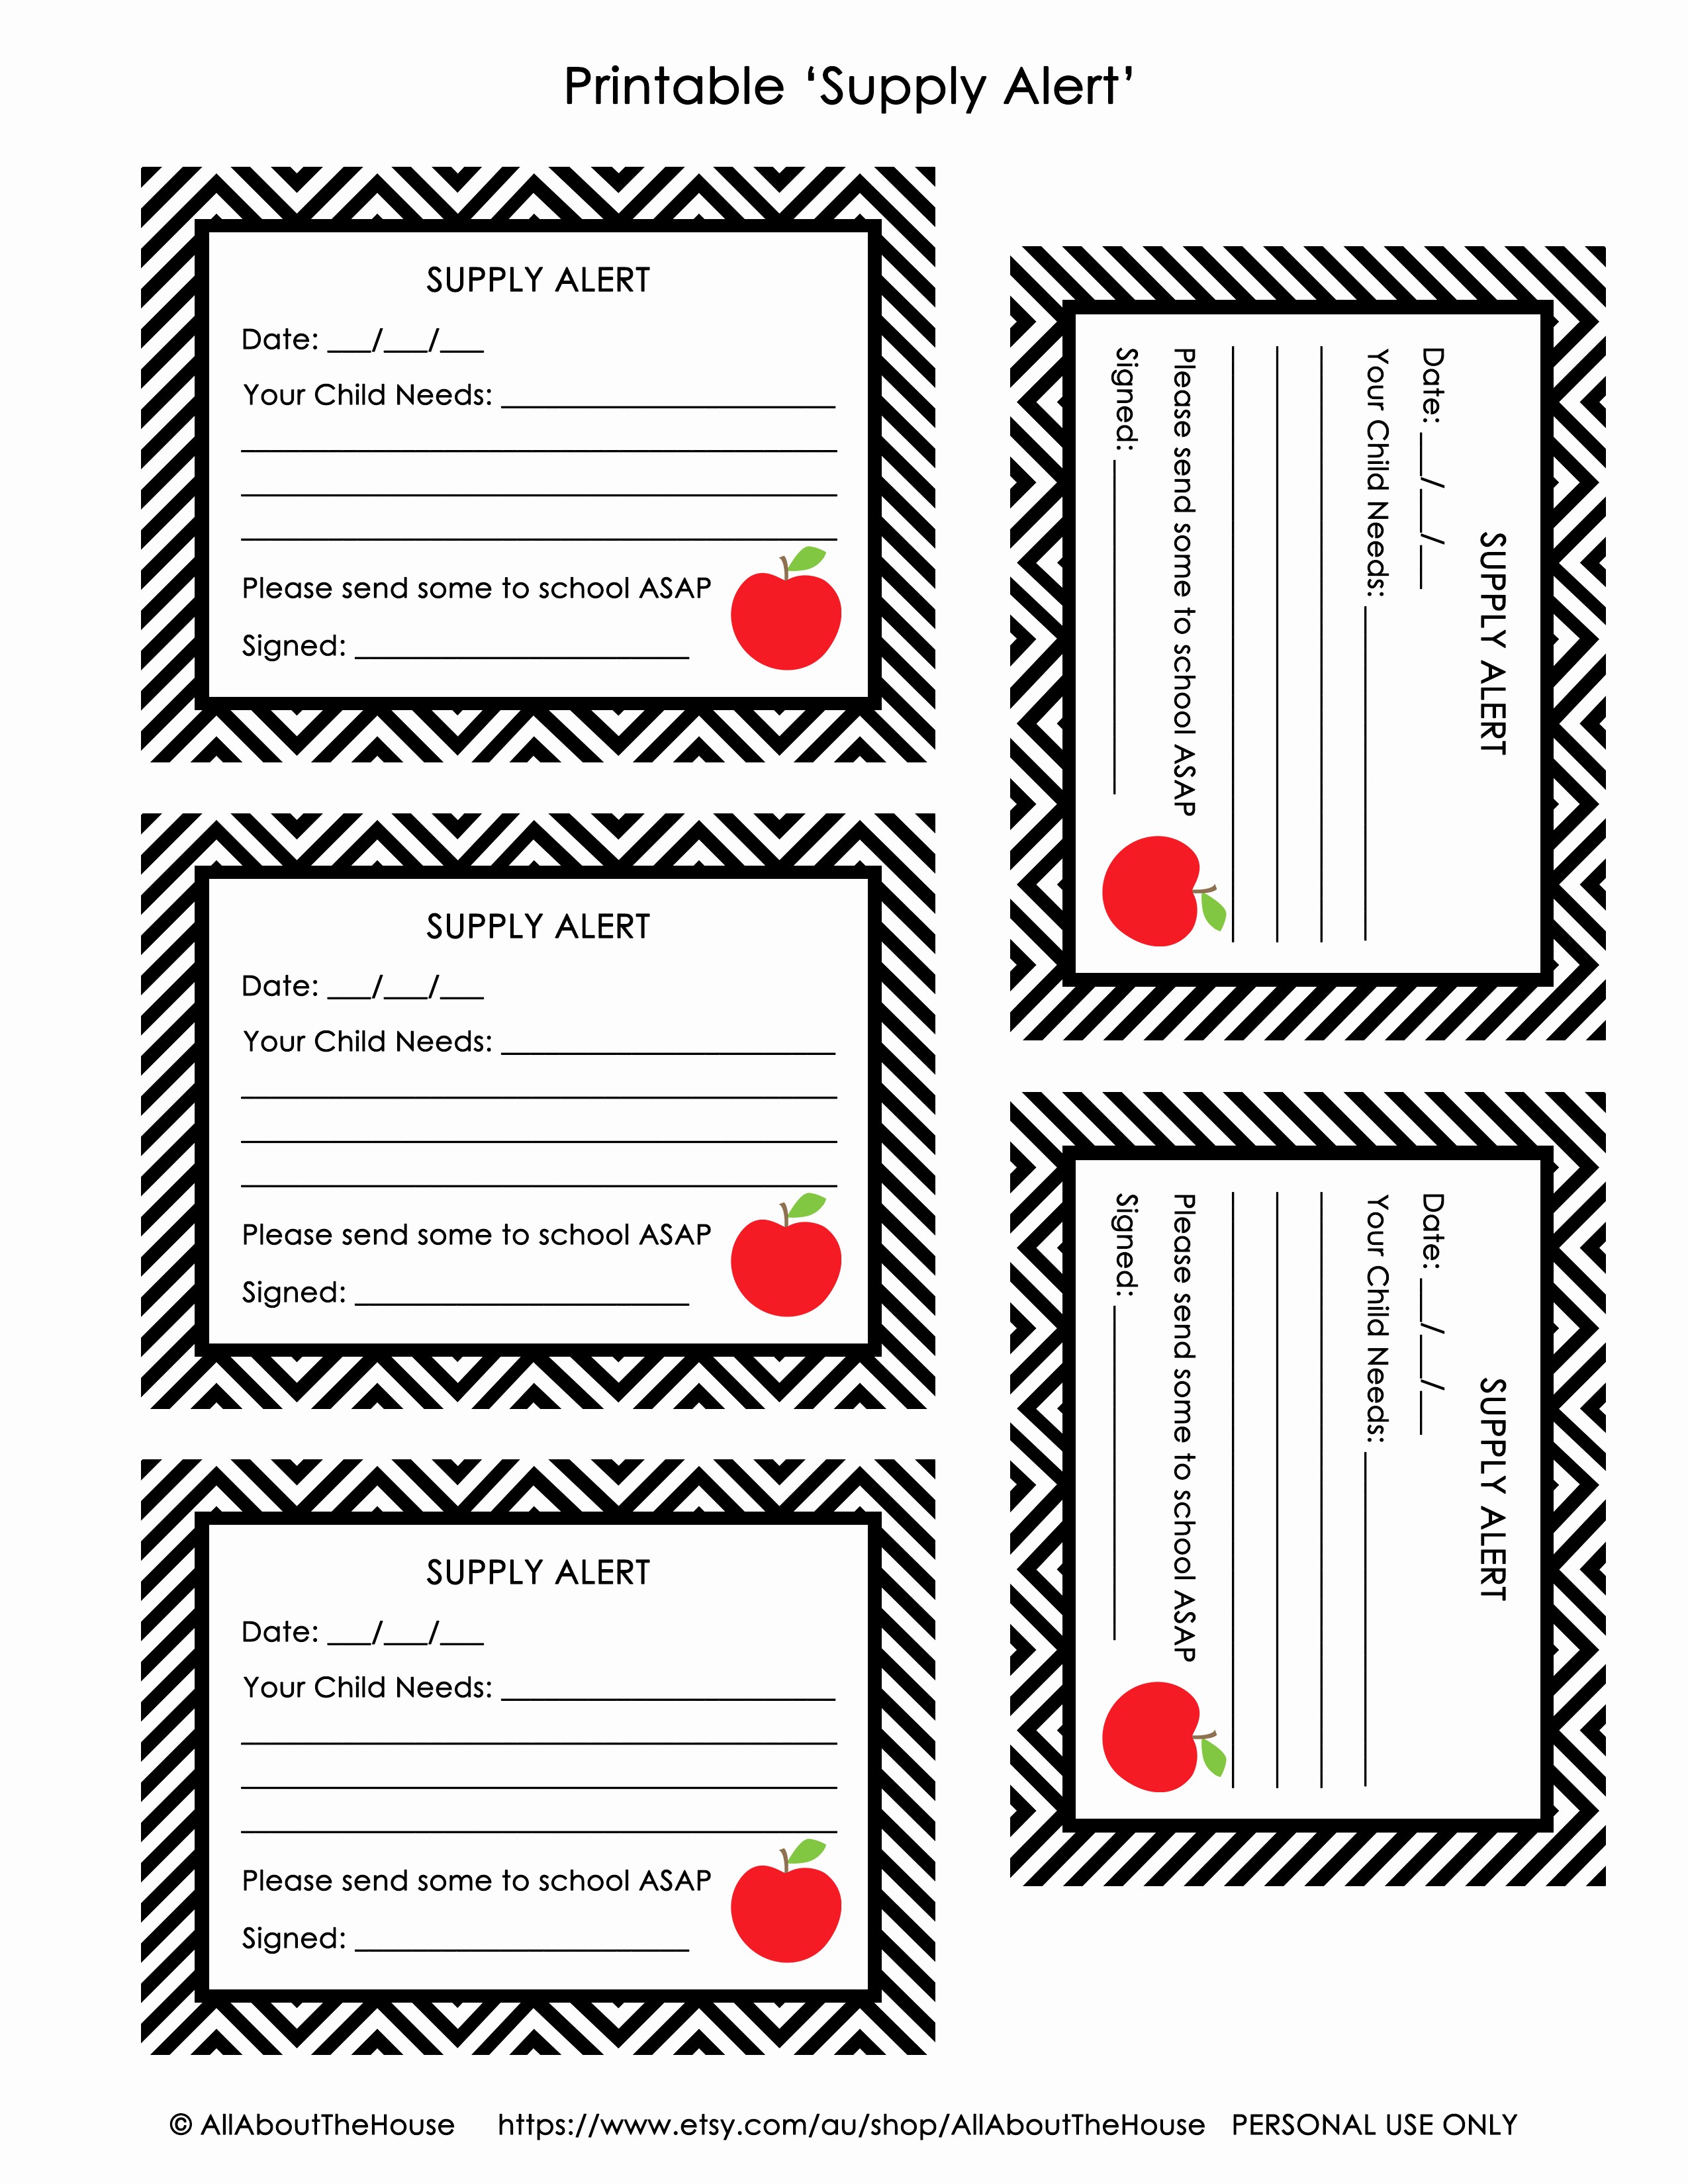 Printable Hall Passes for Students Awesome Free Printable Hall Pass and Supply Alert Cards